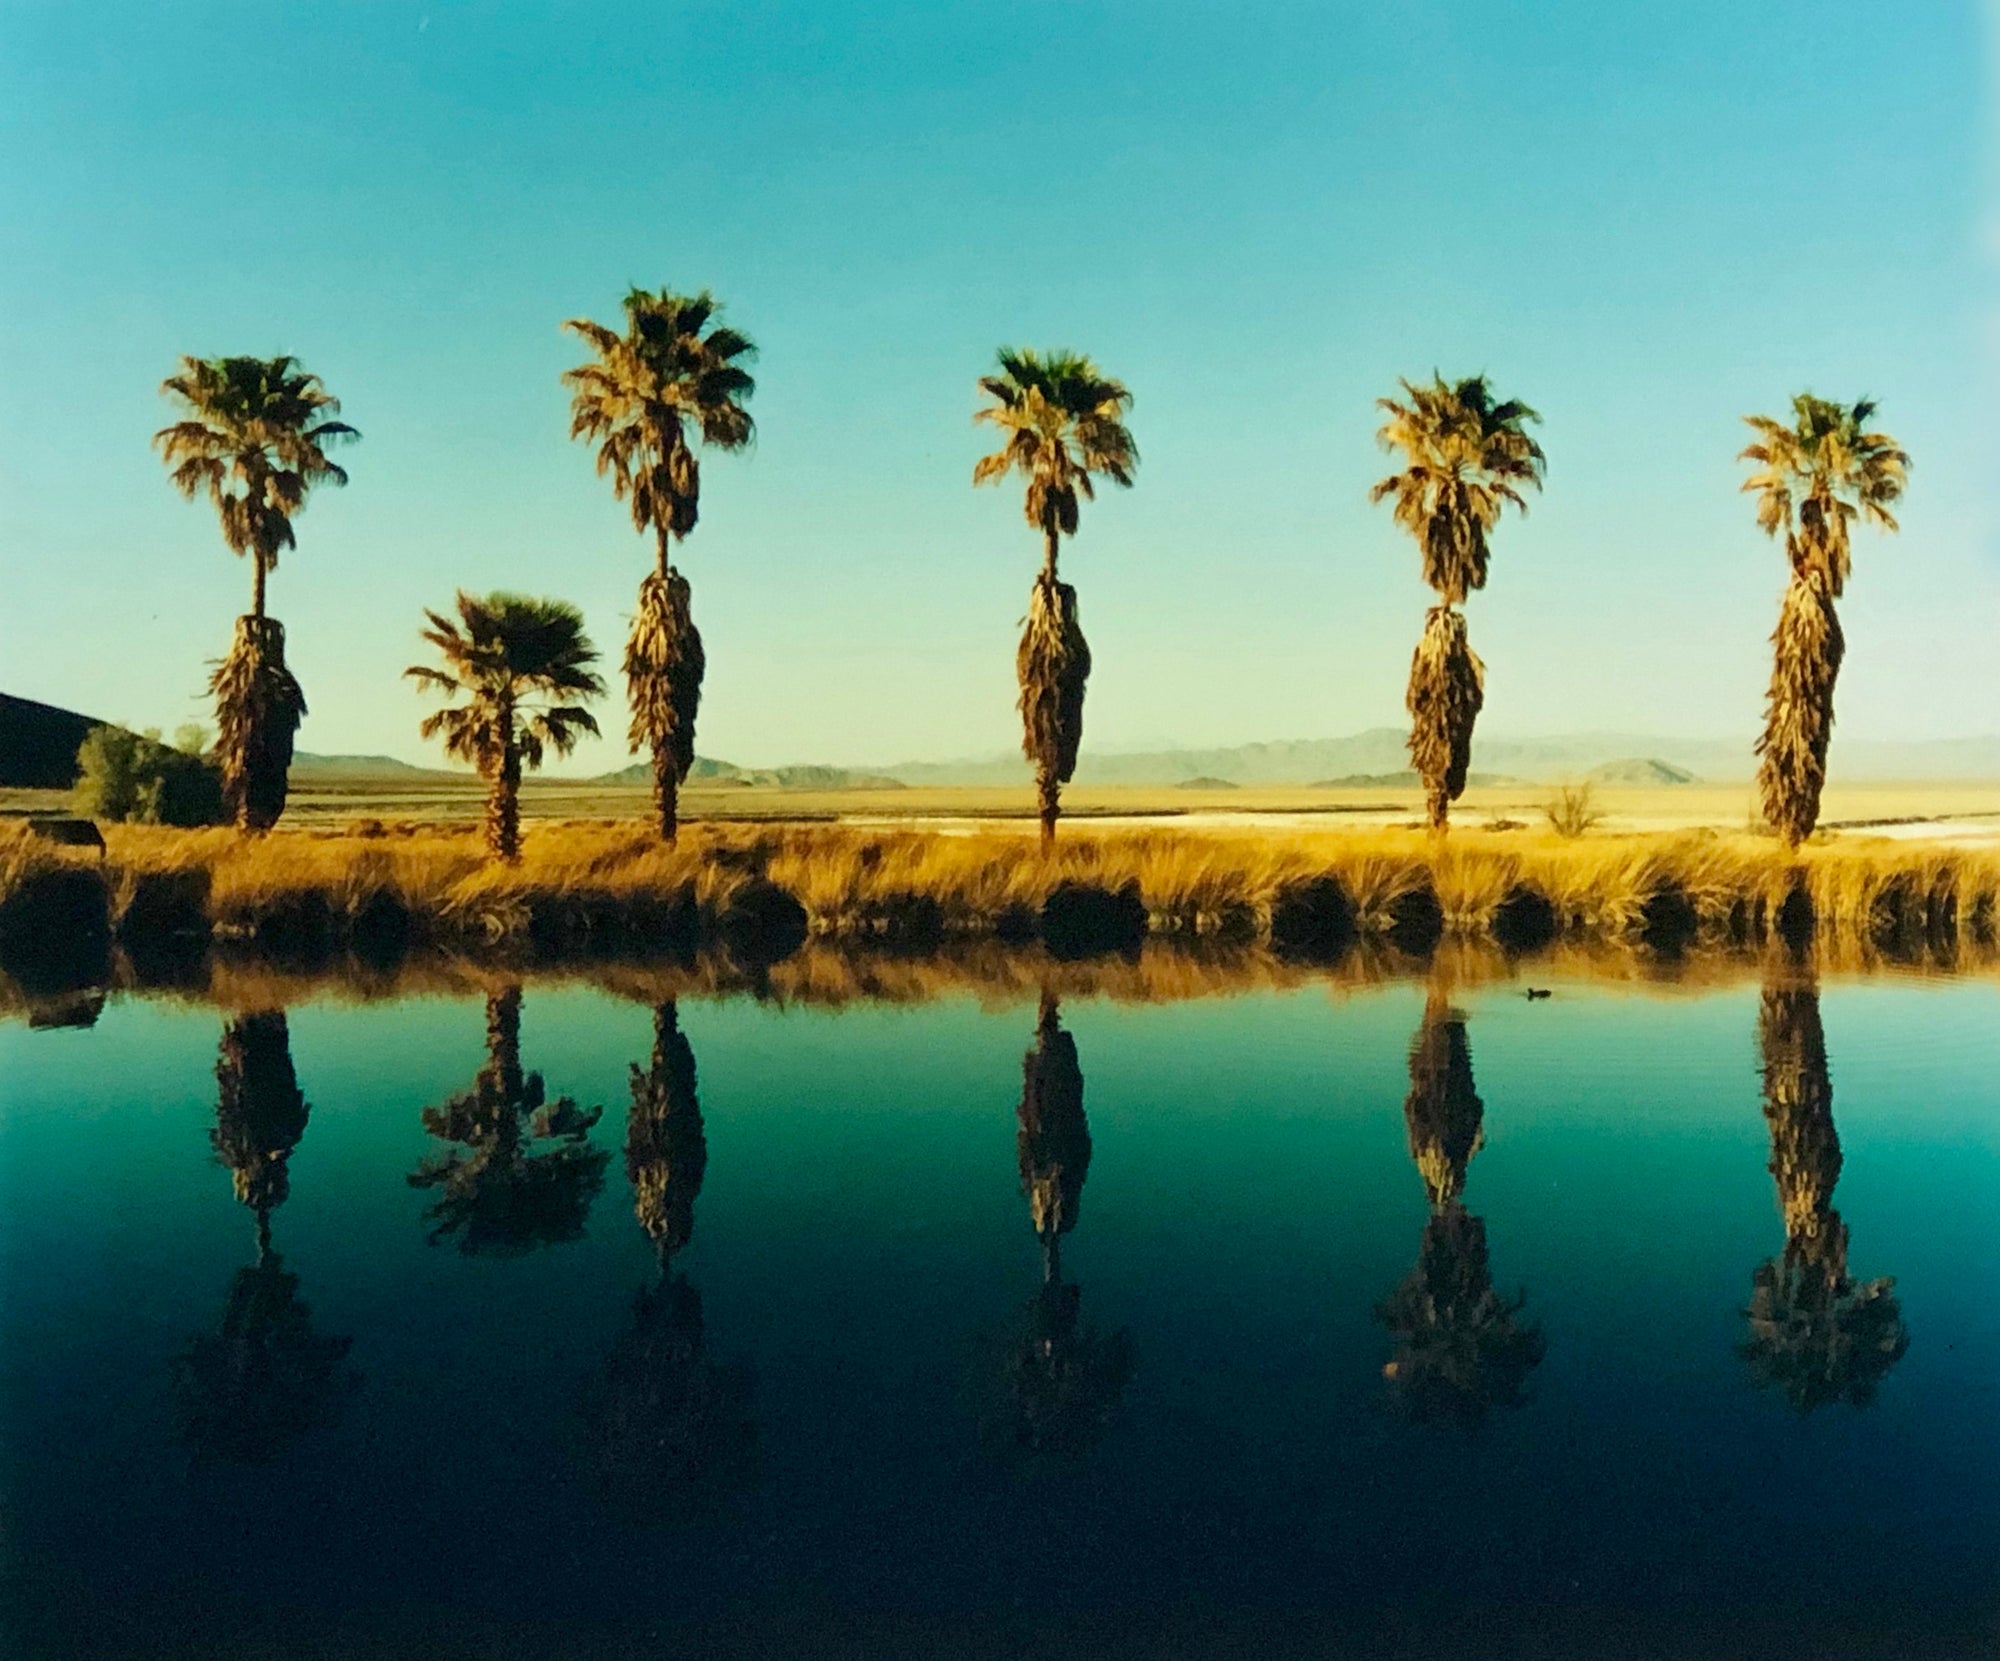 Palm trees stand tall against ombre skies in shades of blue and green in 'Zzyzx Resort Pool II', taken in Soda Dry Lake, California. This artwork was taken on a road trip from LA to Las Vegas. This photograph was taken on negative in 2002 but only executed in Richard's darkroom for the first time in 2017.